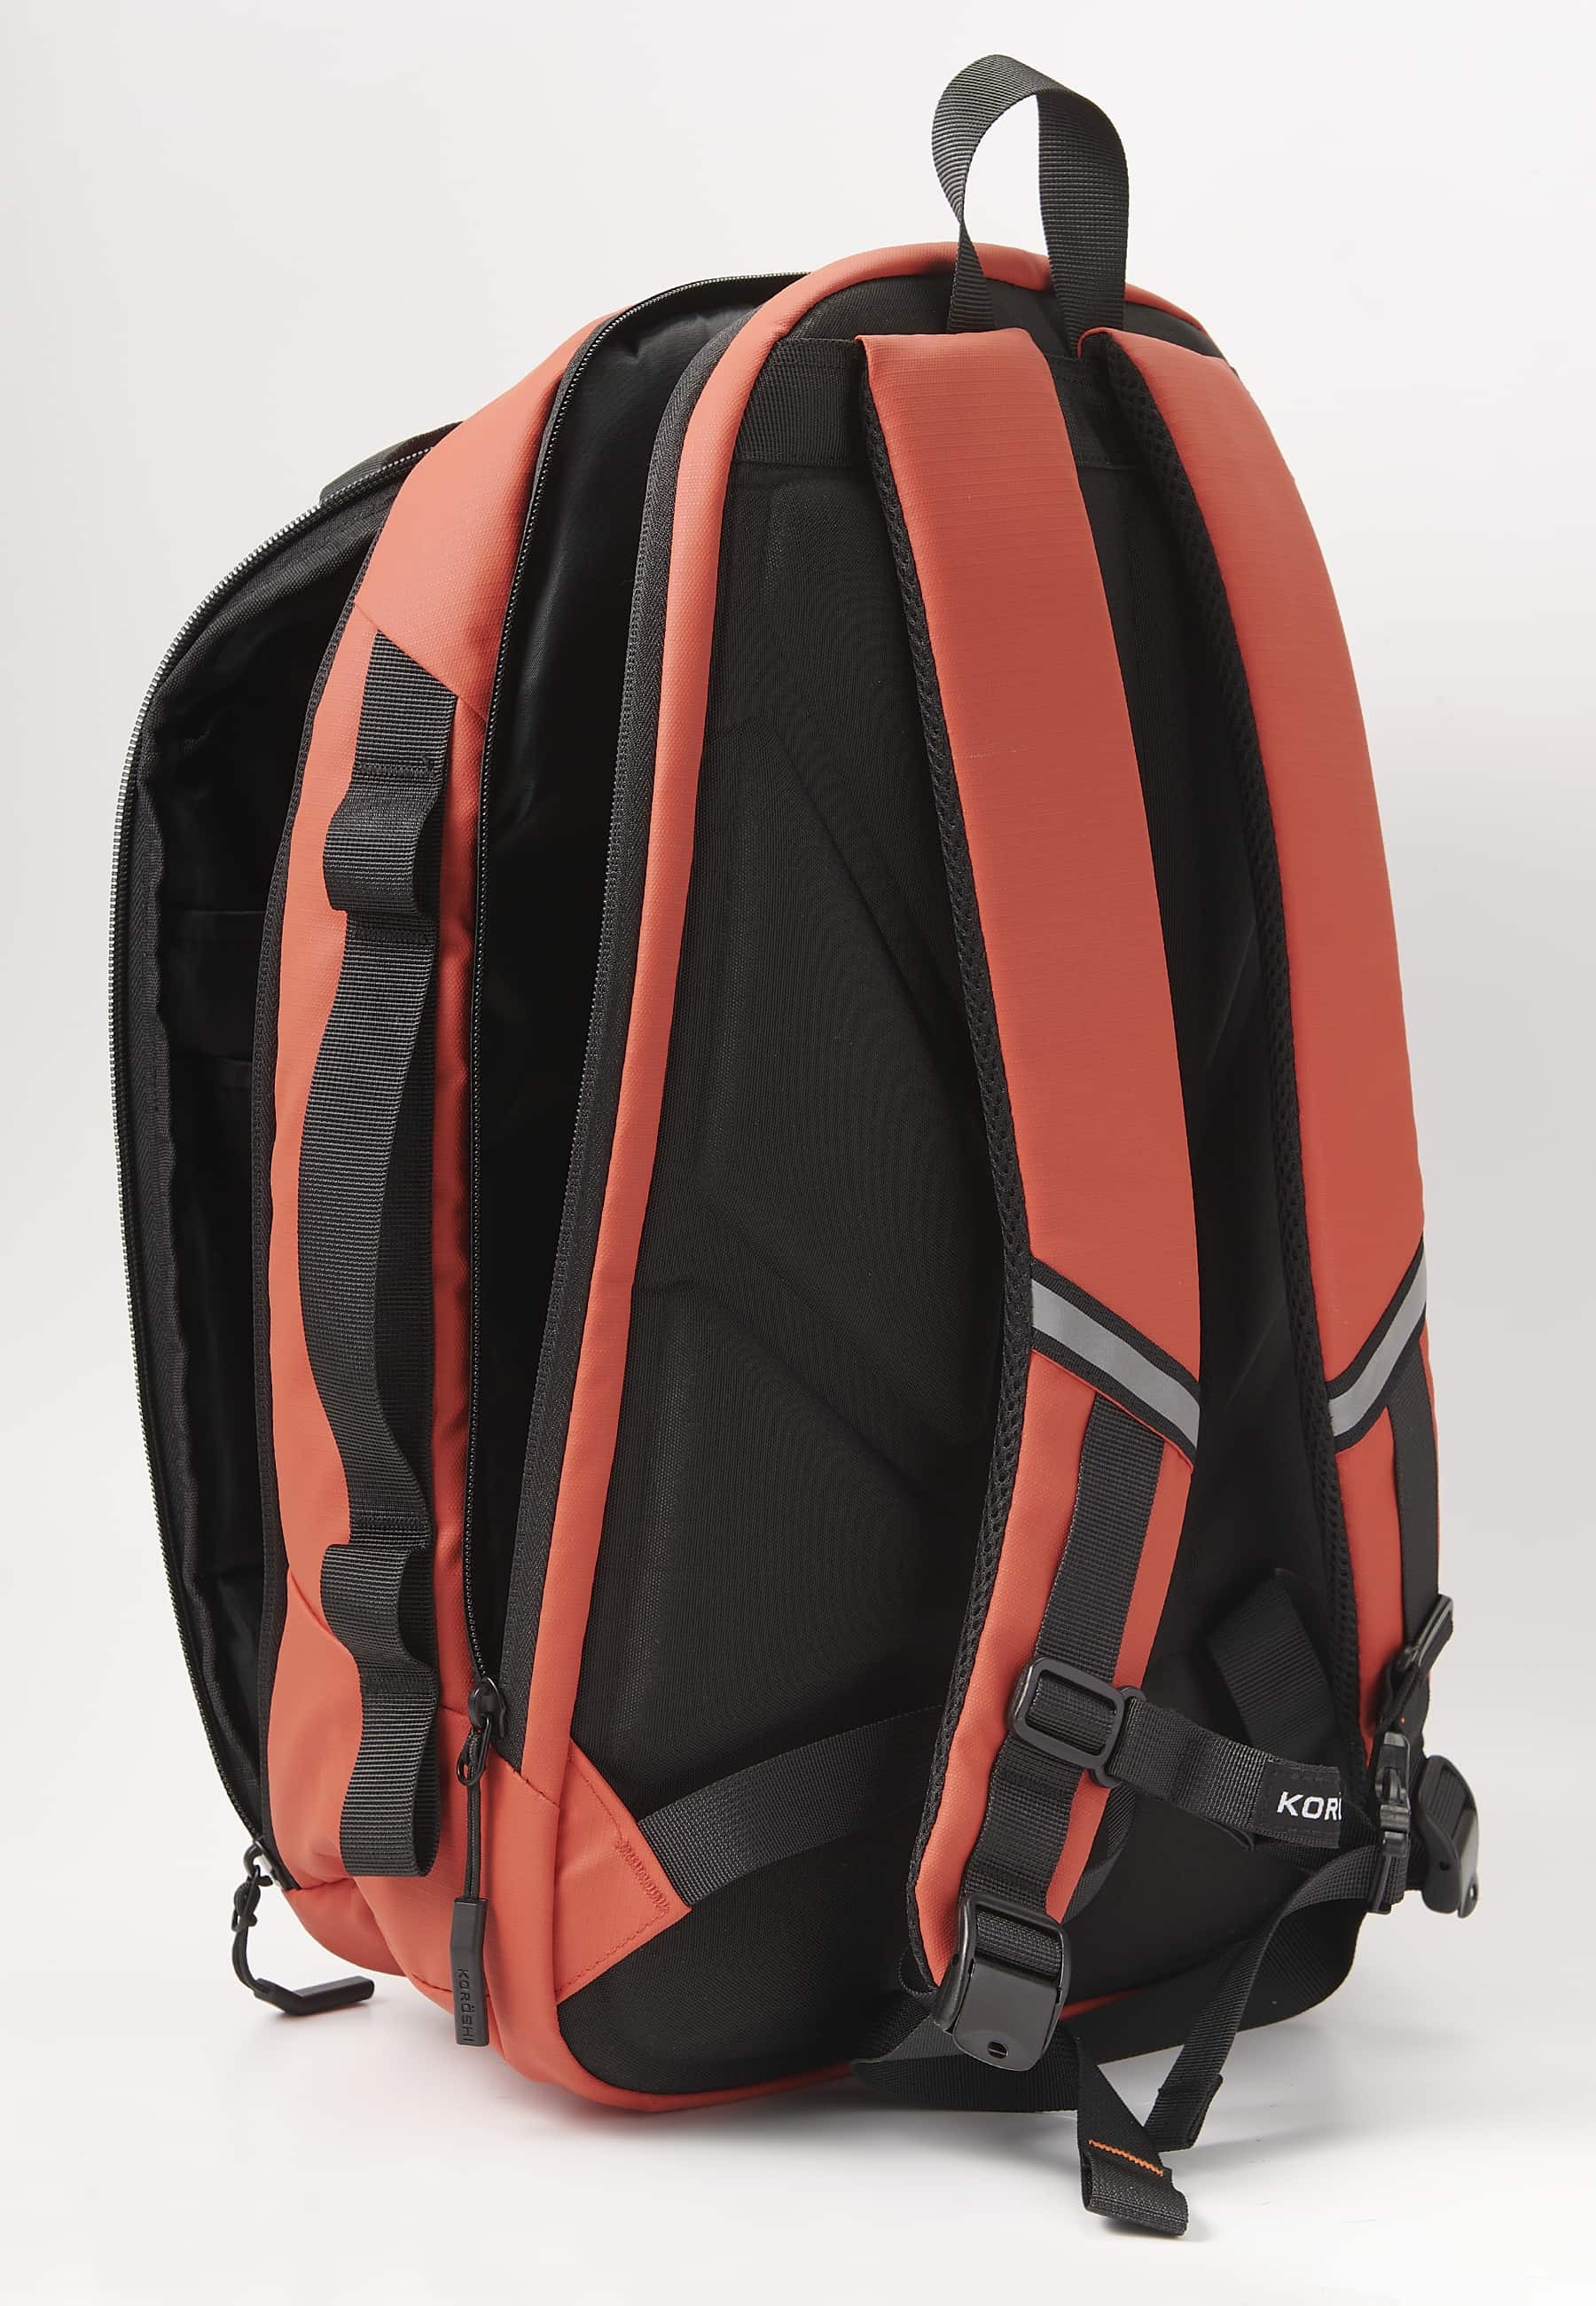 Koröshi backpack with two zippered compartments, one for a laptop and adjustable straps in Red